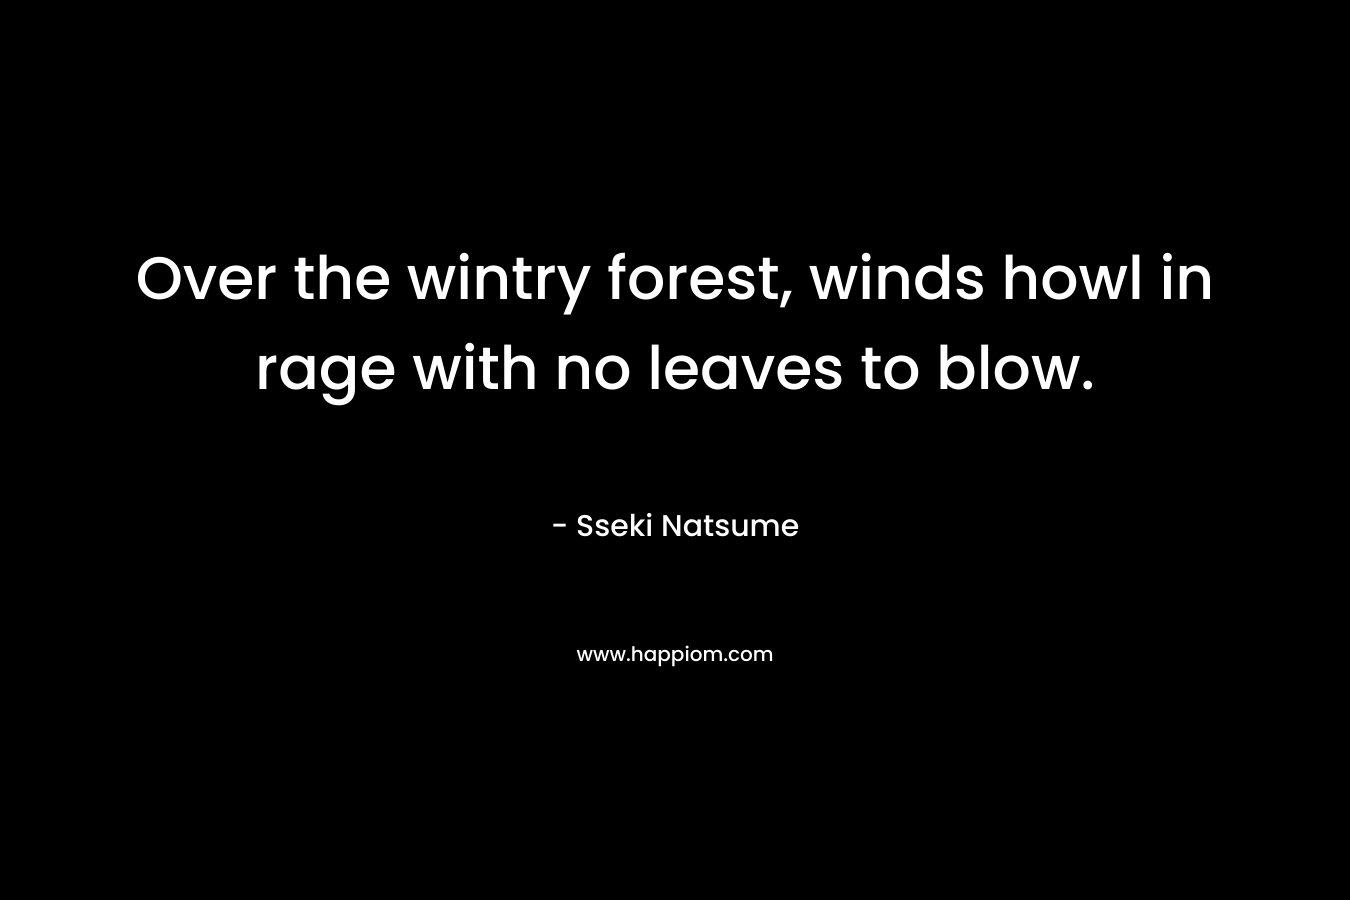 Over the wintry forest, winds howl in rage with no leaves to blow.